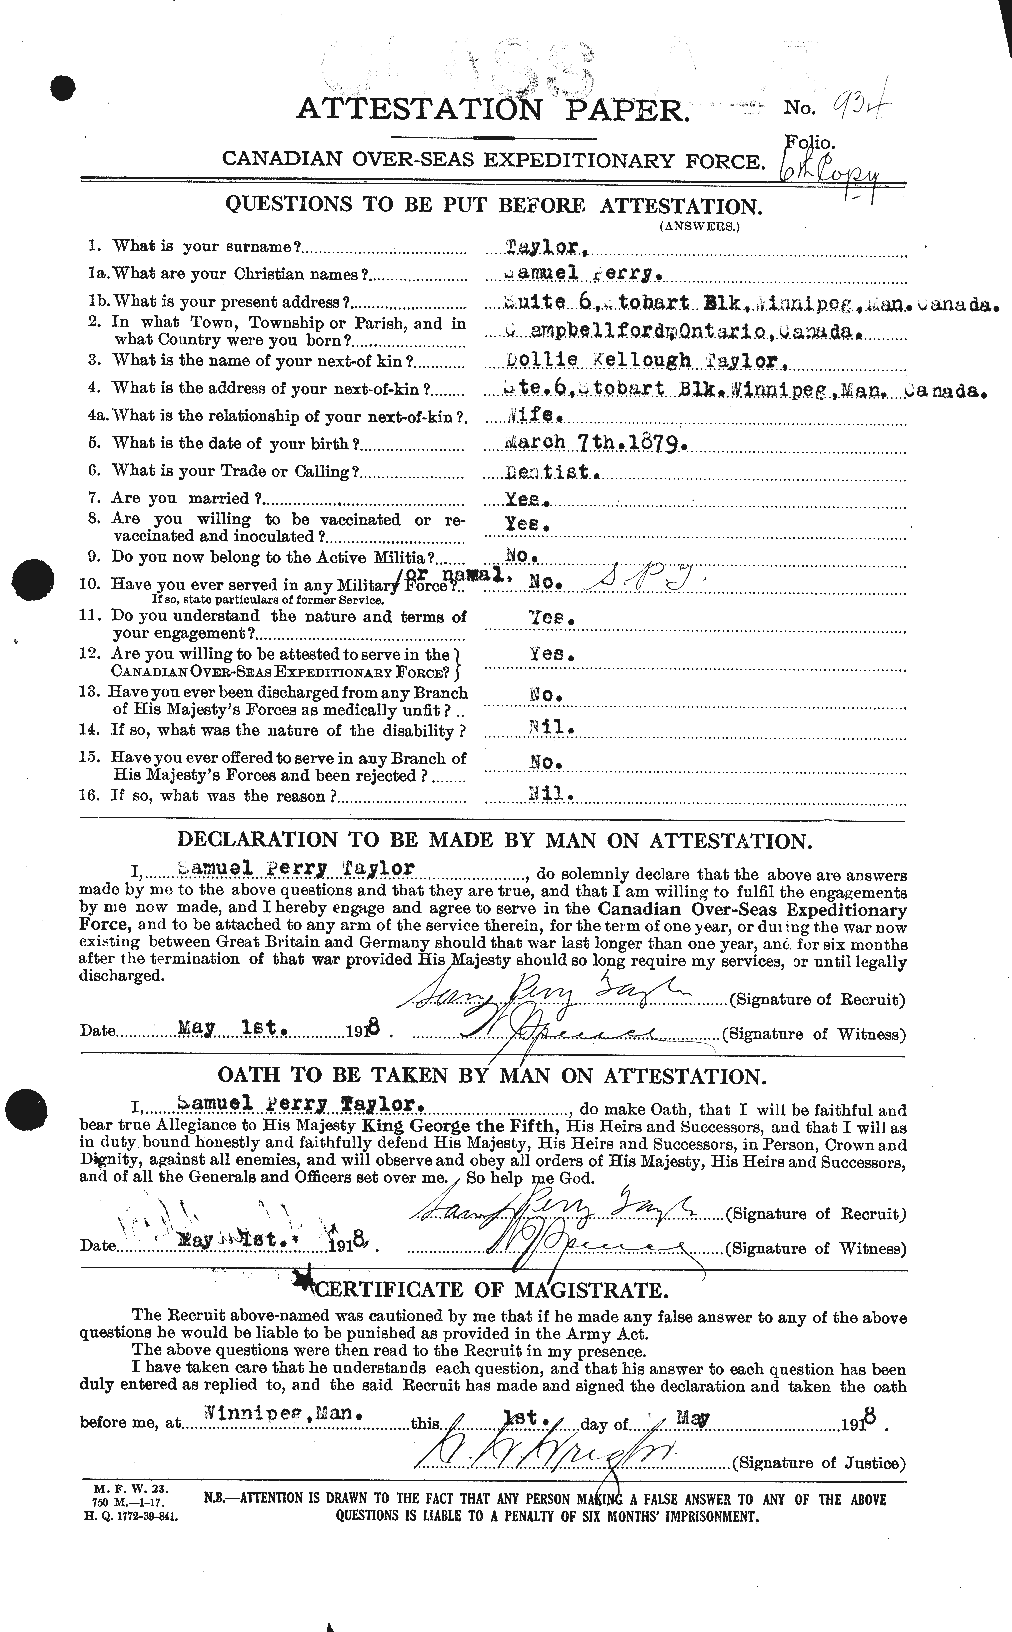 Personnel Records of the First World War - CEF 627881a